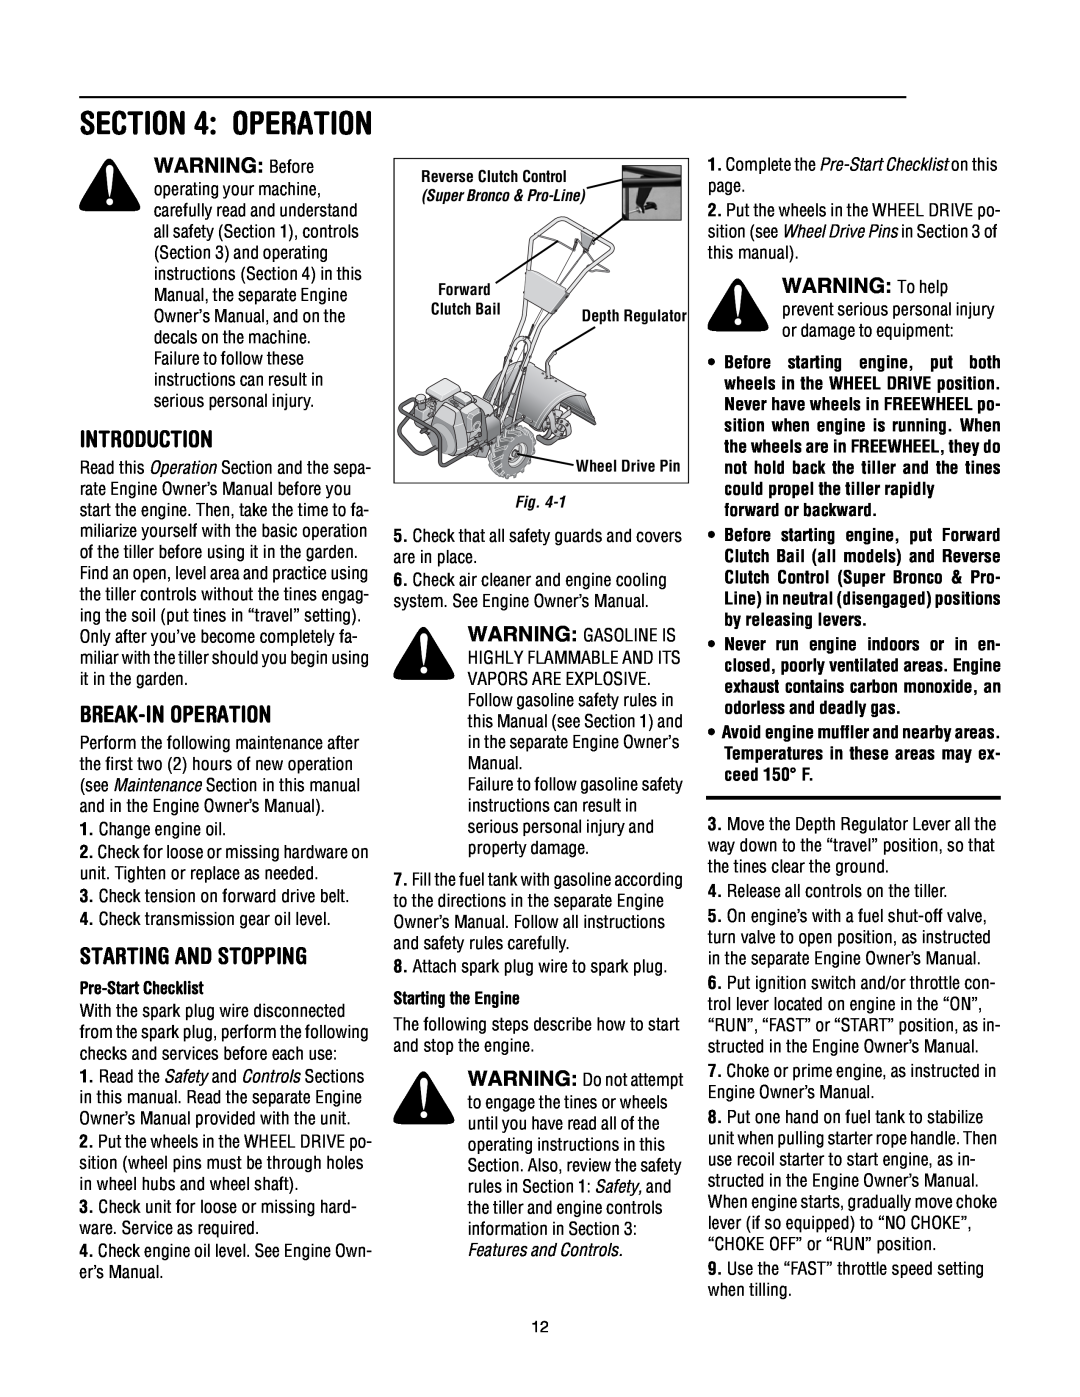 Troy-Bilt Super Bronco manual Break-In Operation, Starting And Stopping, WARNING To help, Pre-Start Checklist, Introduction 